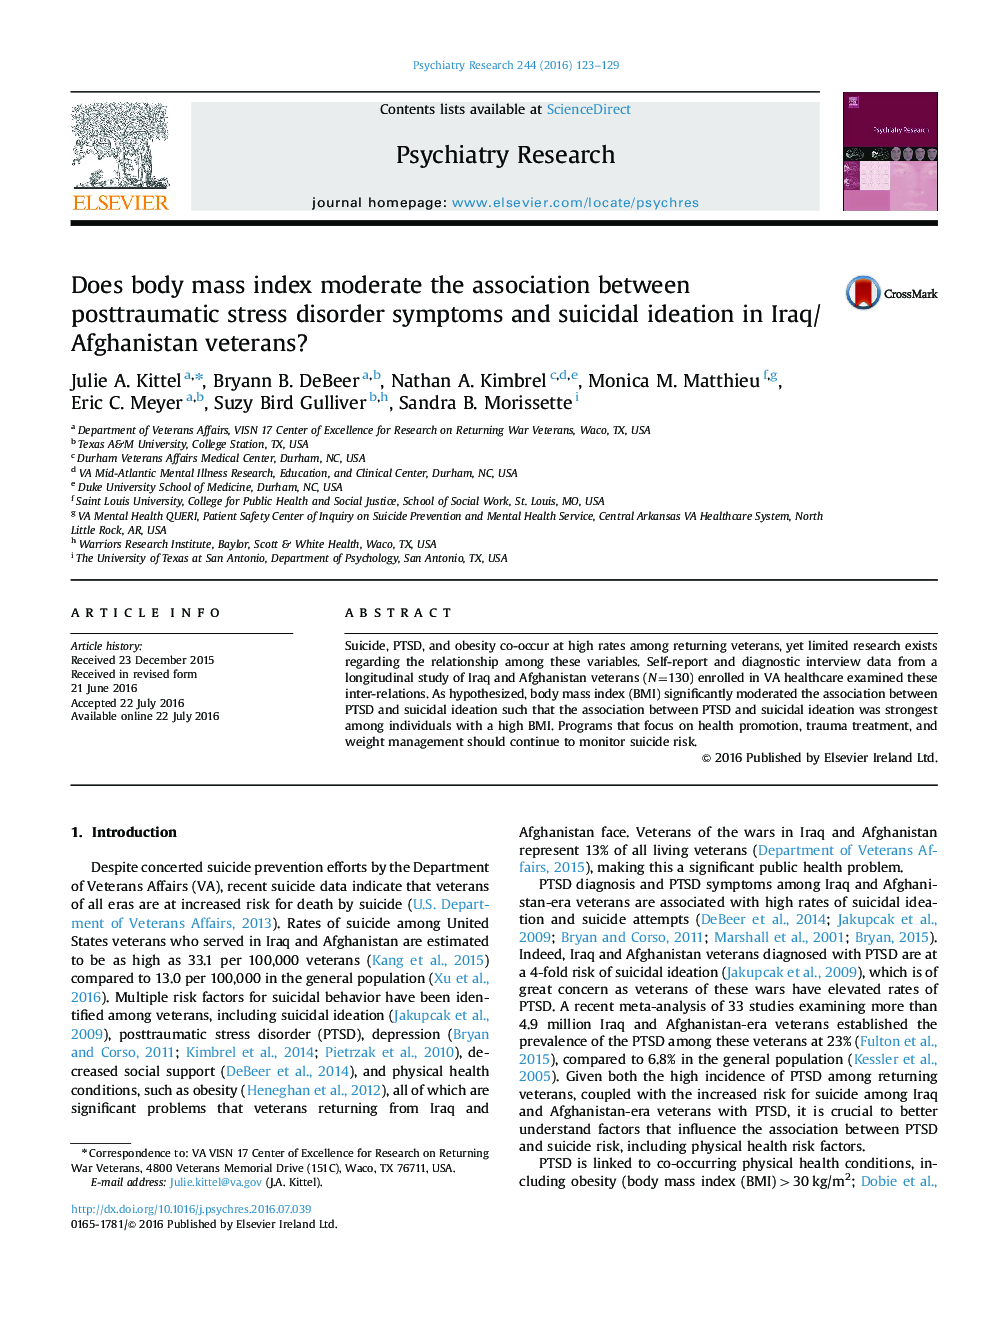 Does body mass index moderate the association between posttraumatic stress disorder symptoms and suicidal ideation in Iraq/Afghanistan veterans?